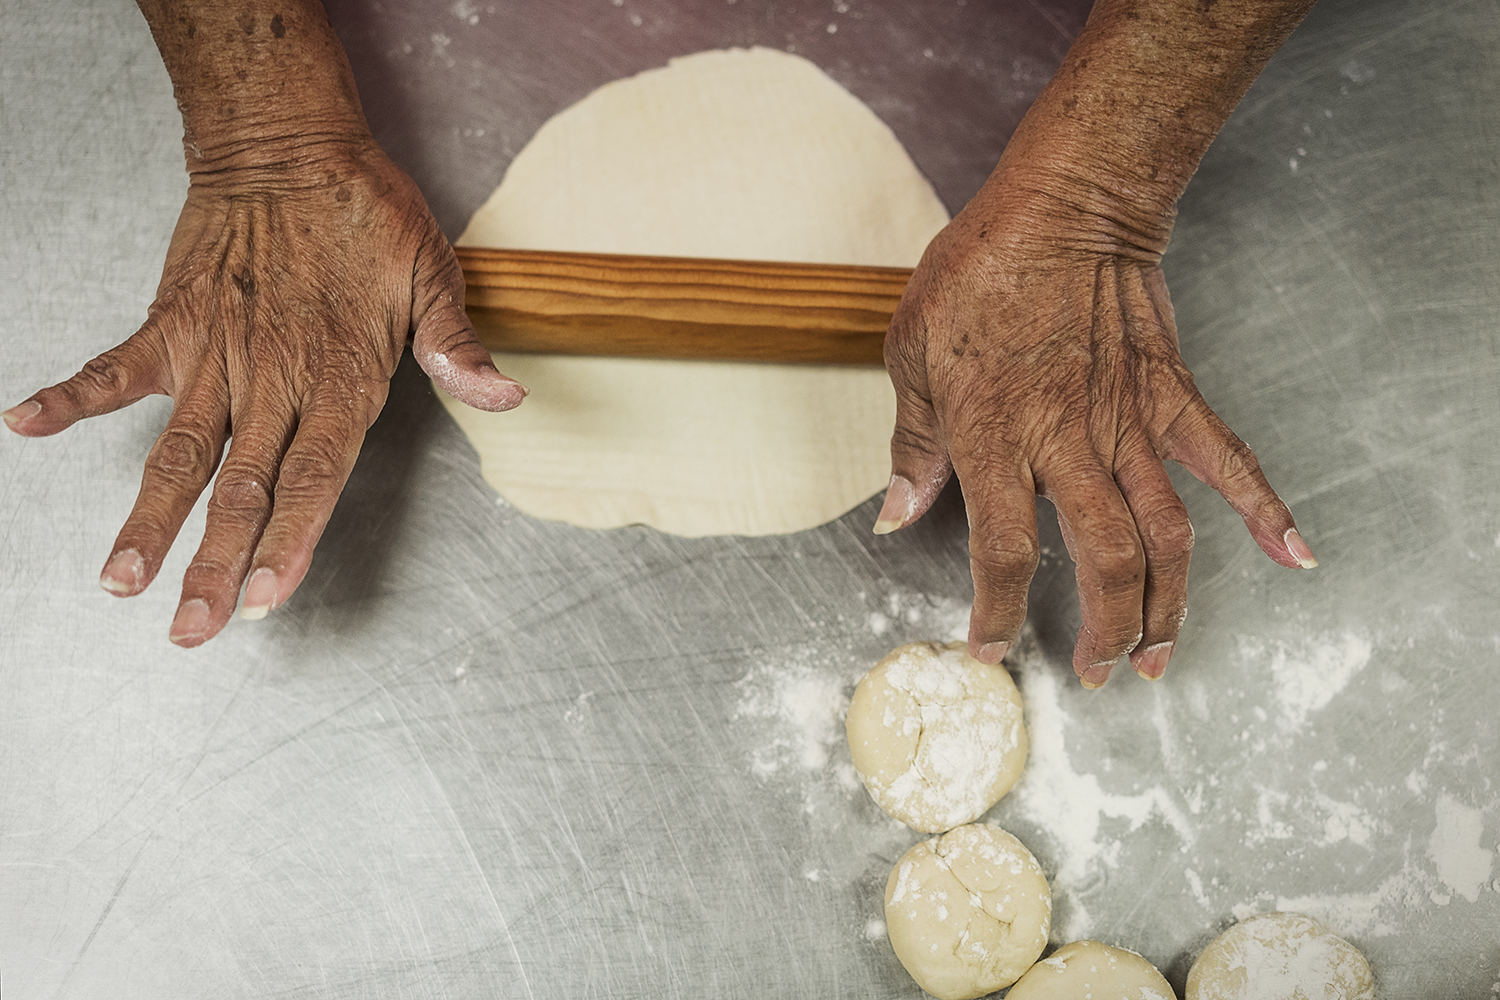 Ofelia Luna, 79, of Flint, rolls out masa to make tortillas, a weekly tradition at Our Lady of Guadalupe Catholic Church.